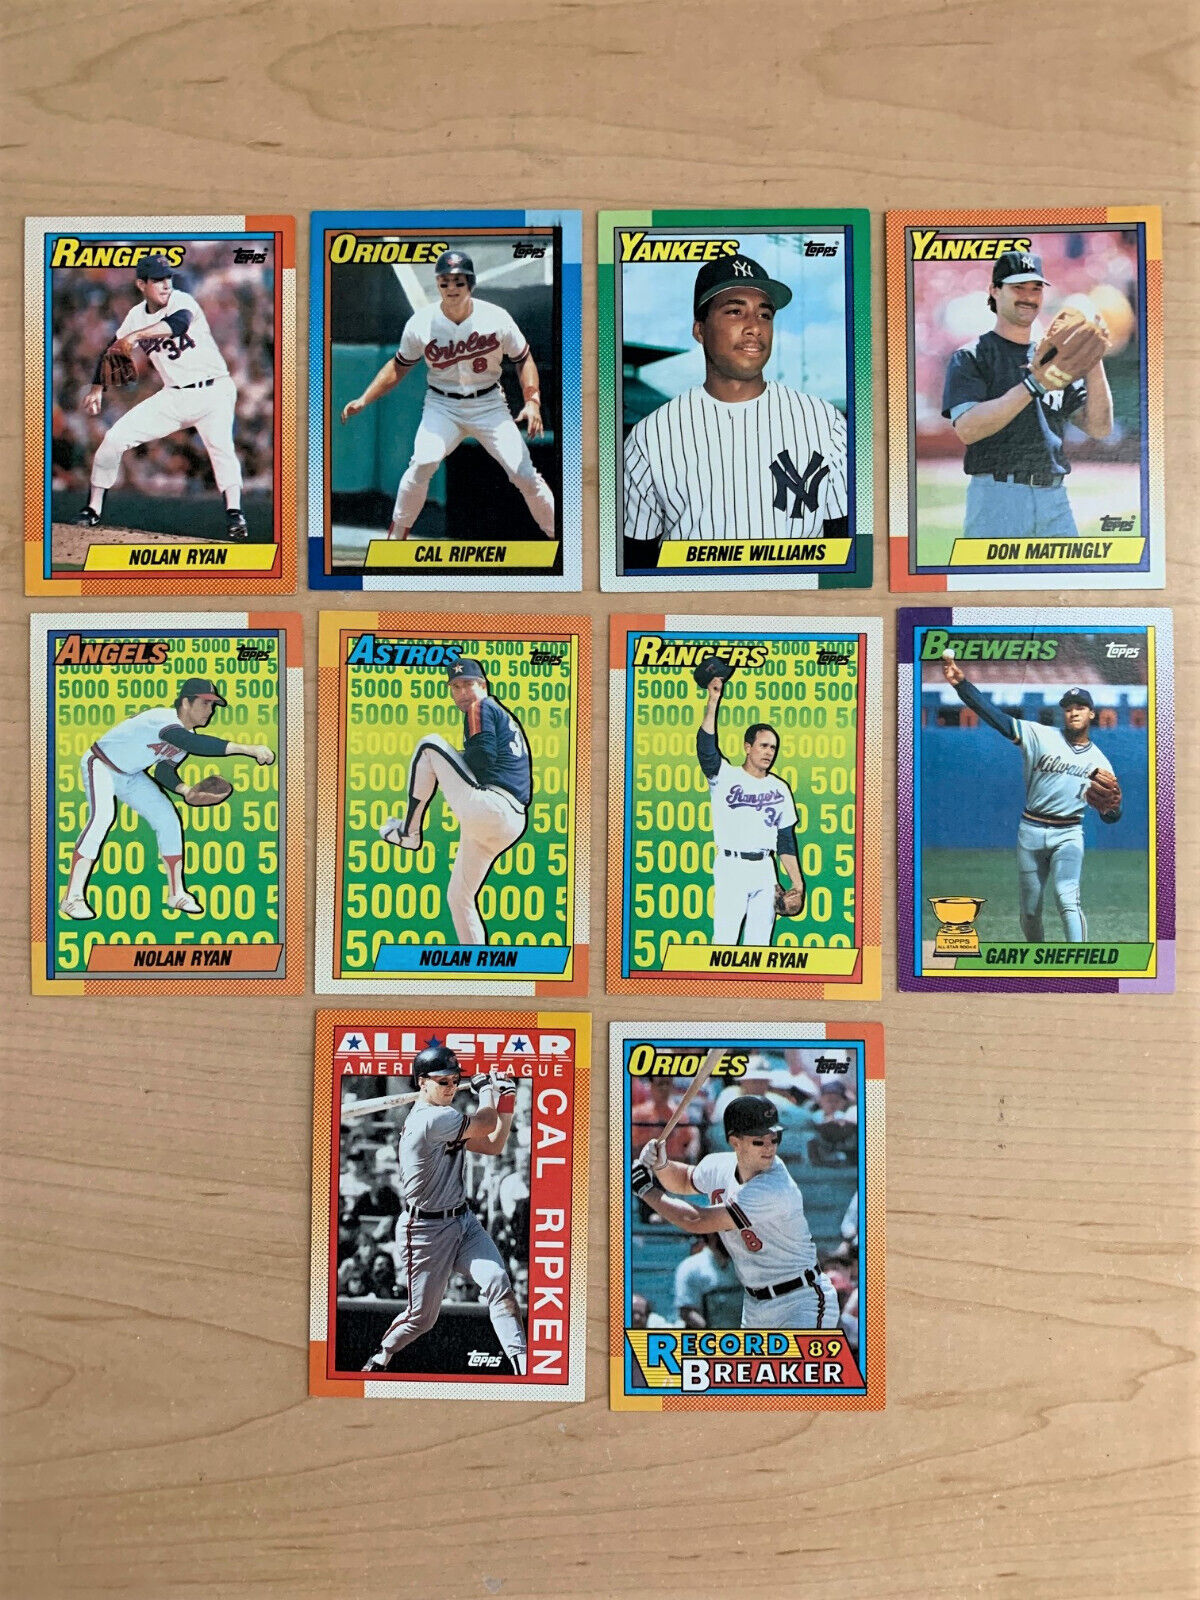 Primary image for 1990 Topps Baseball Cards (Set of 10) Near Mint or Better Condition